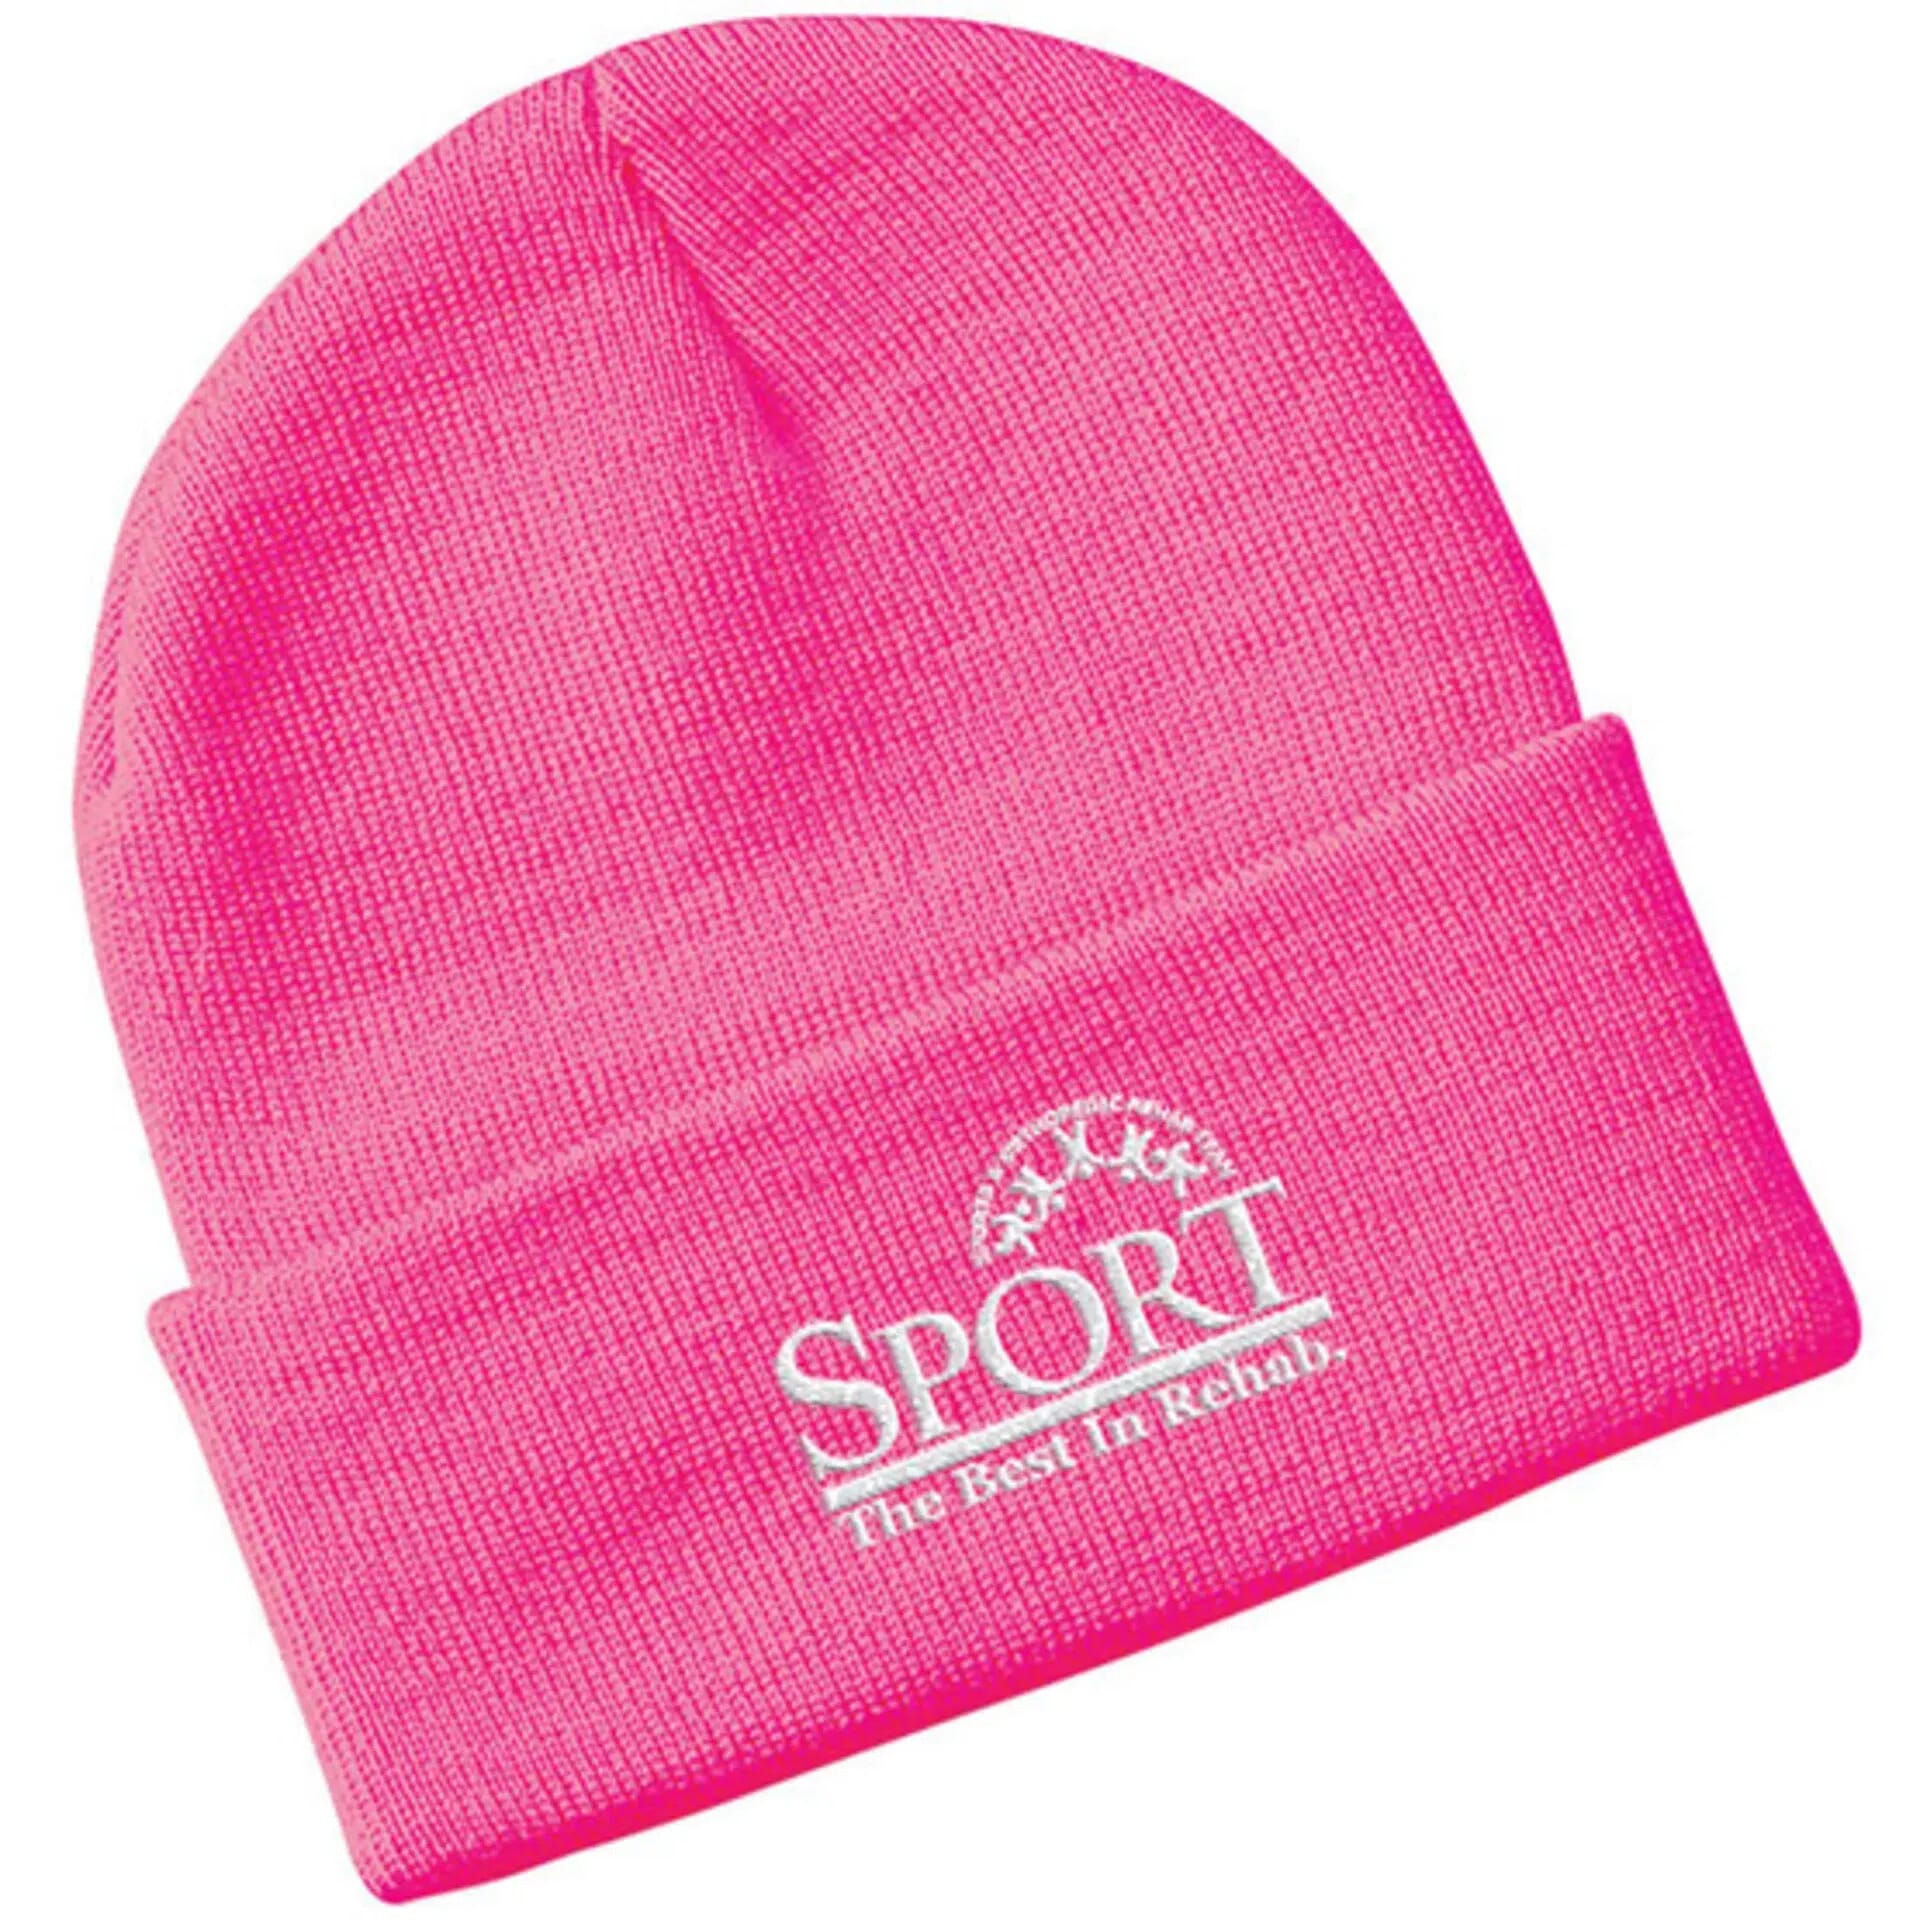 Pink cap with embroidered logo